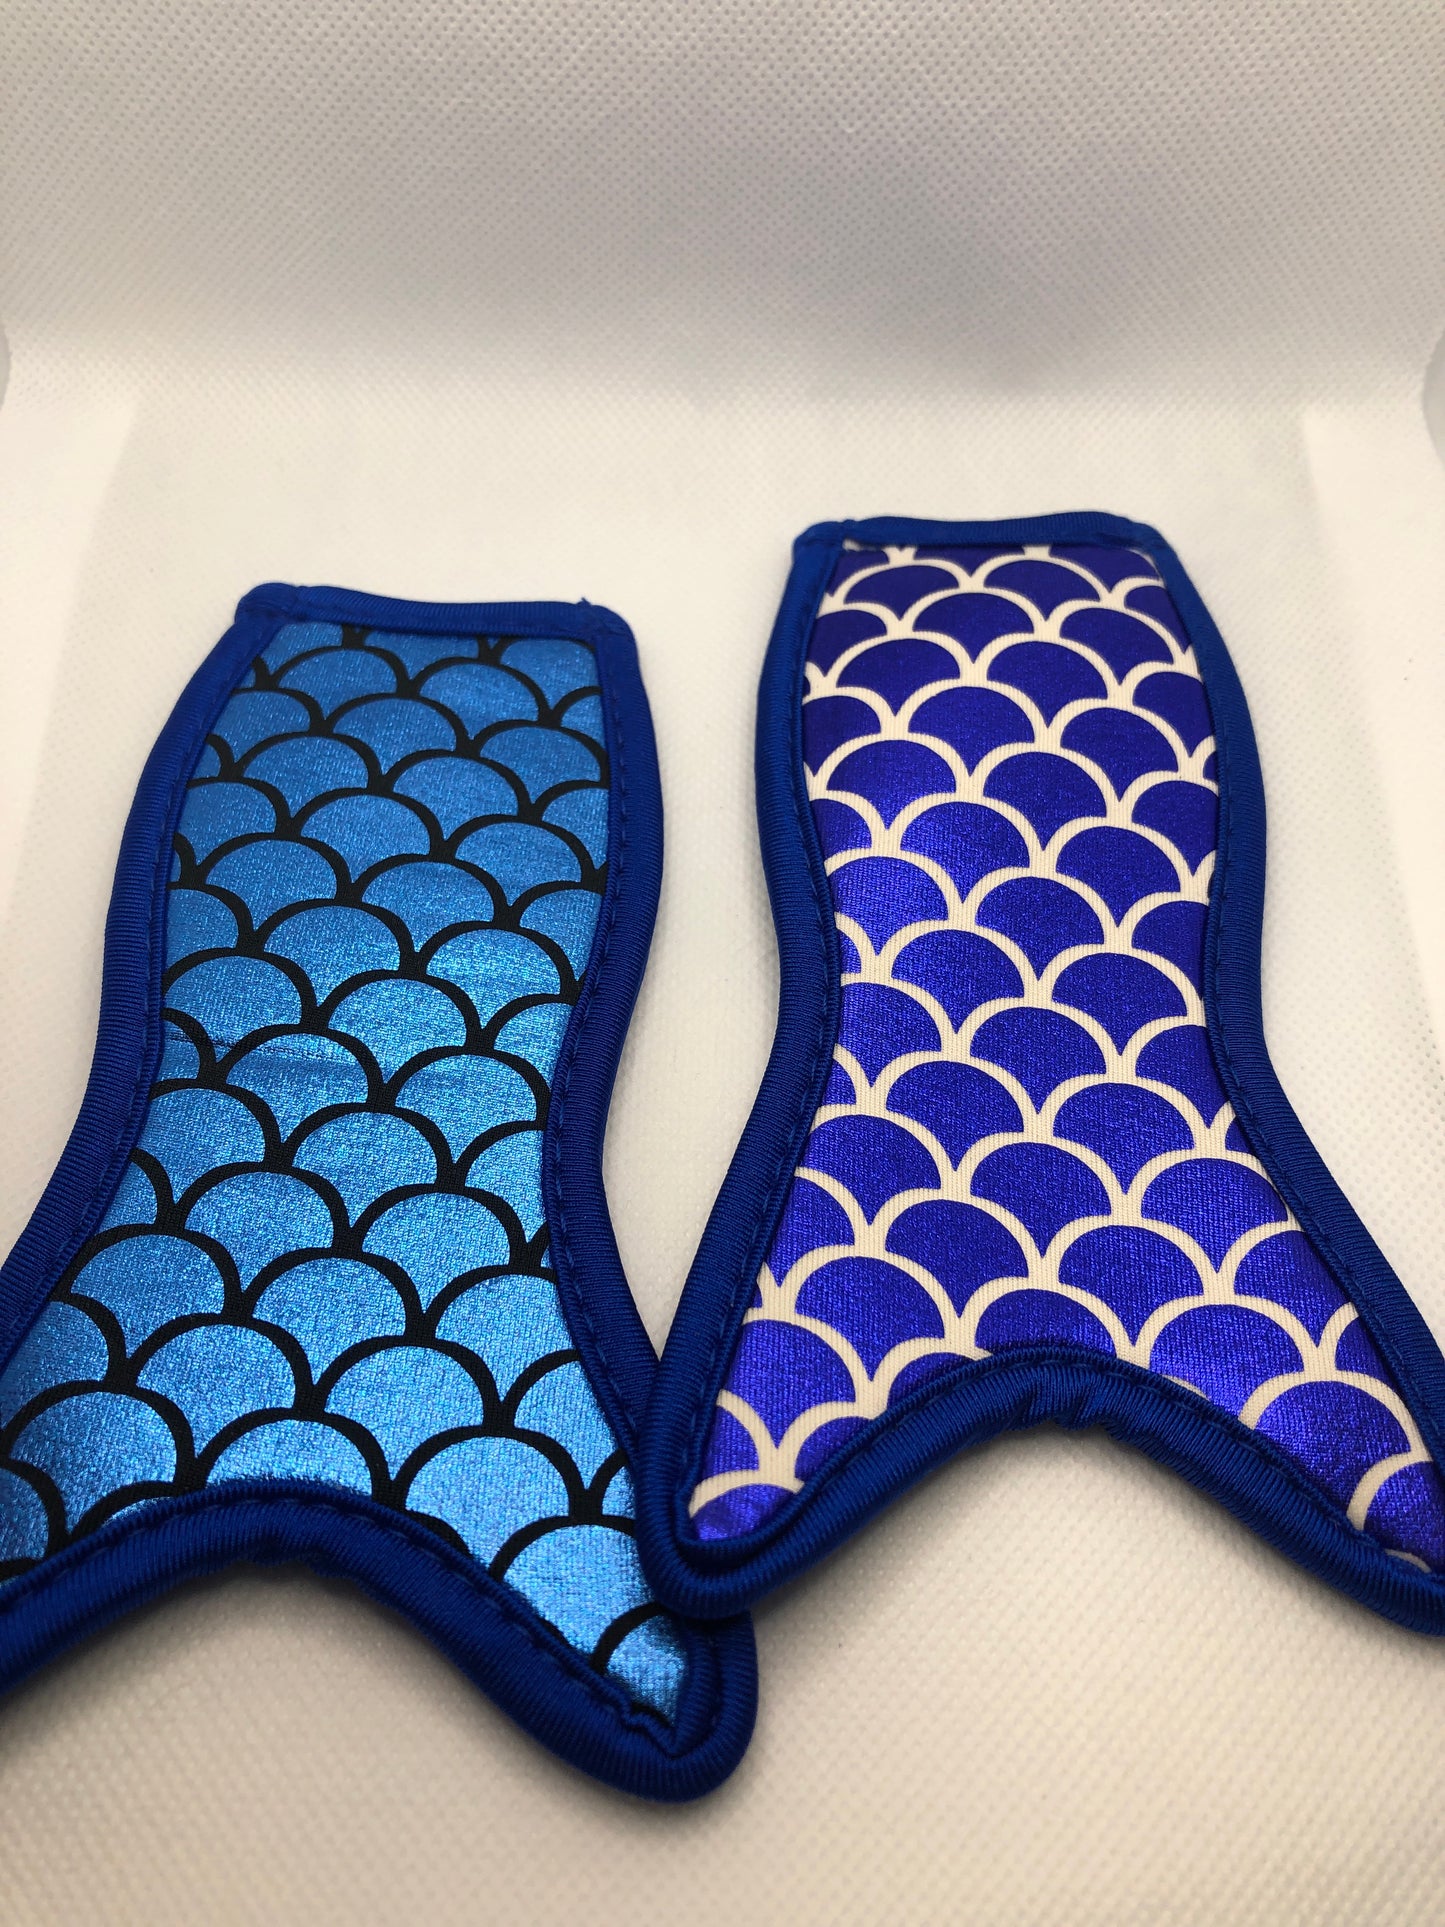 Mermaid Tail Freezie Holders - New Style